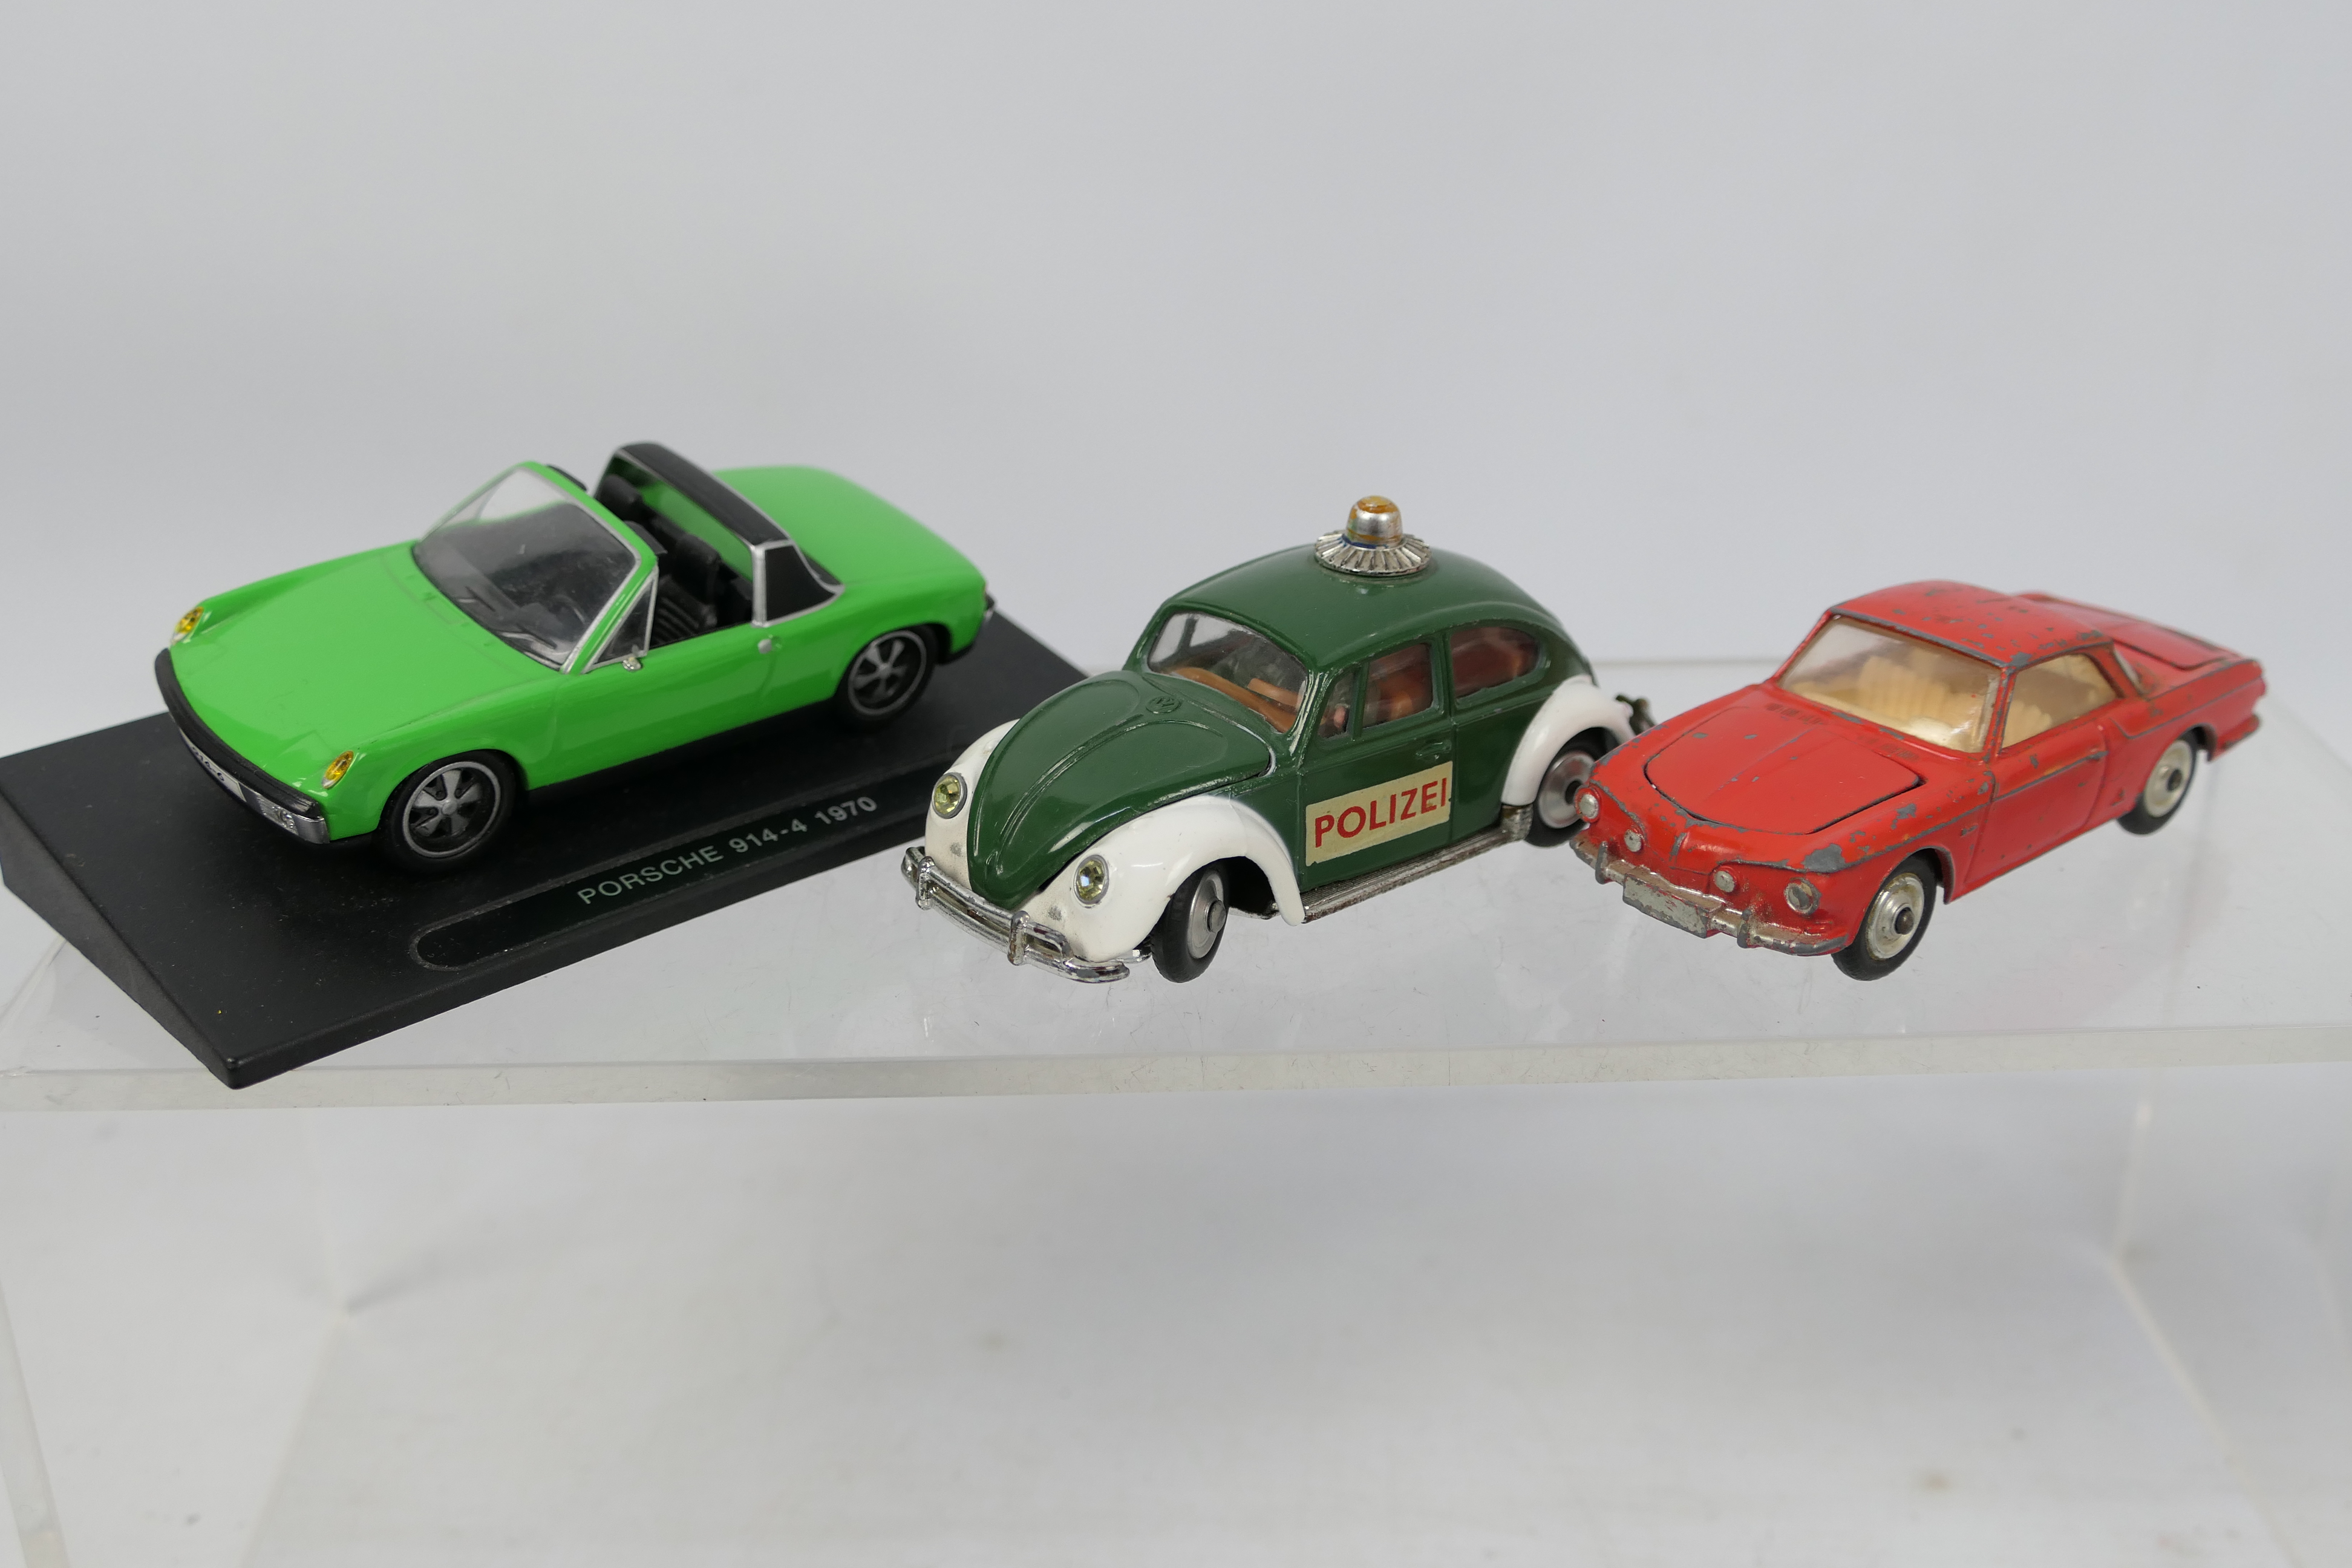 Dinky - Corgi - DeAgostini - 10 x unboxed Volkswagen models in 1:43 scale including Beetle Polizei - Image 2 of 5